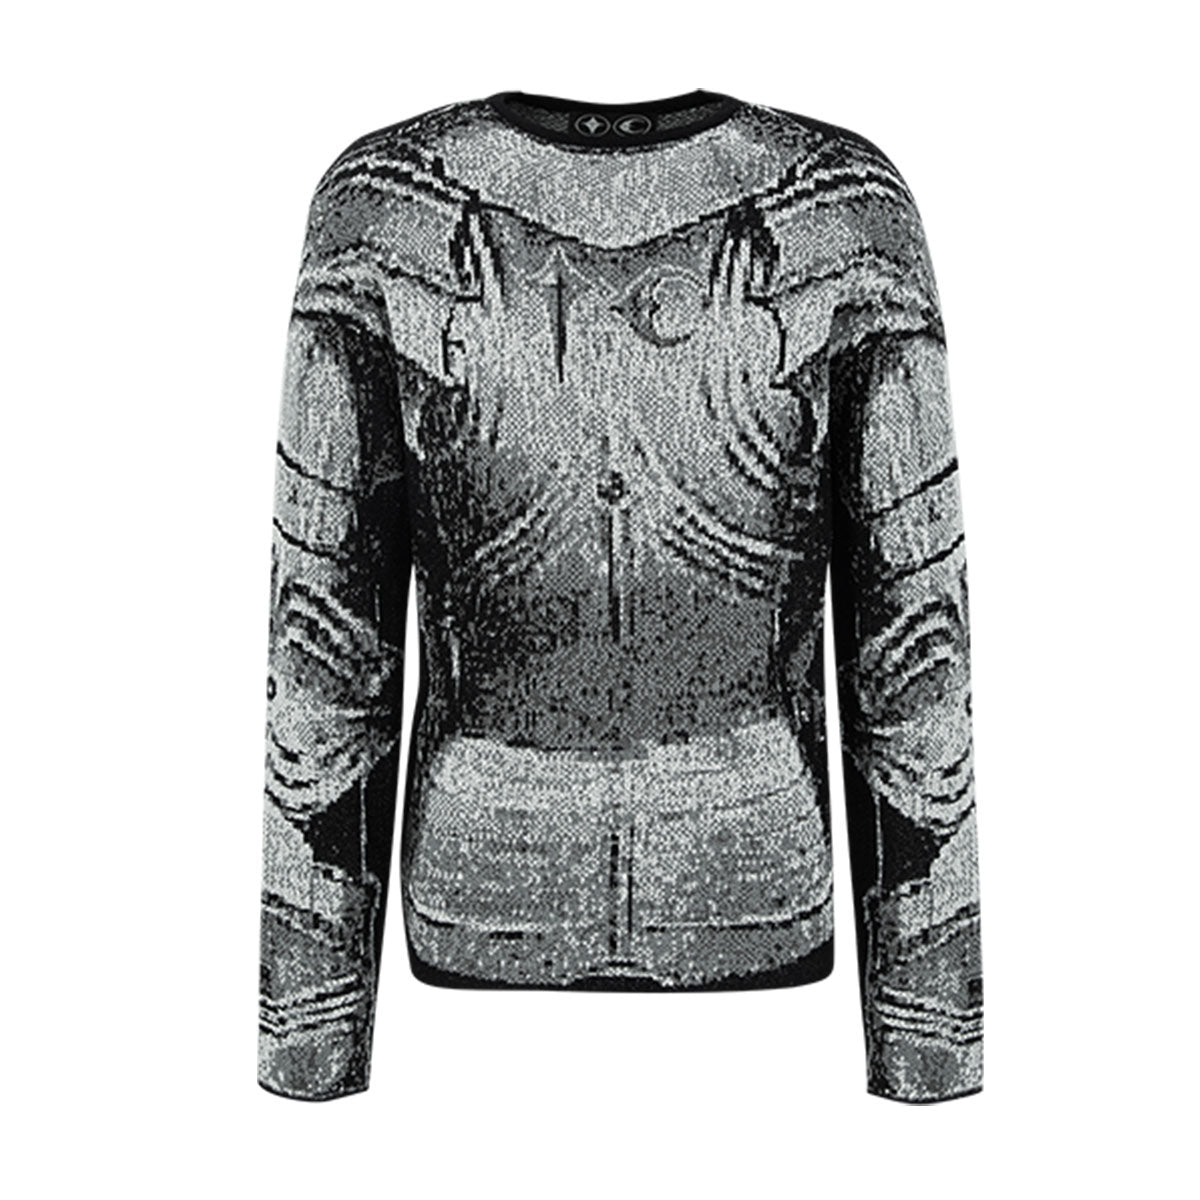 Dragon Knight Armor Knit – Why are you here?